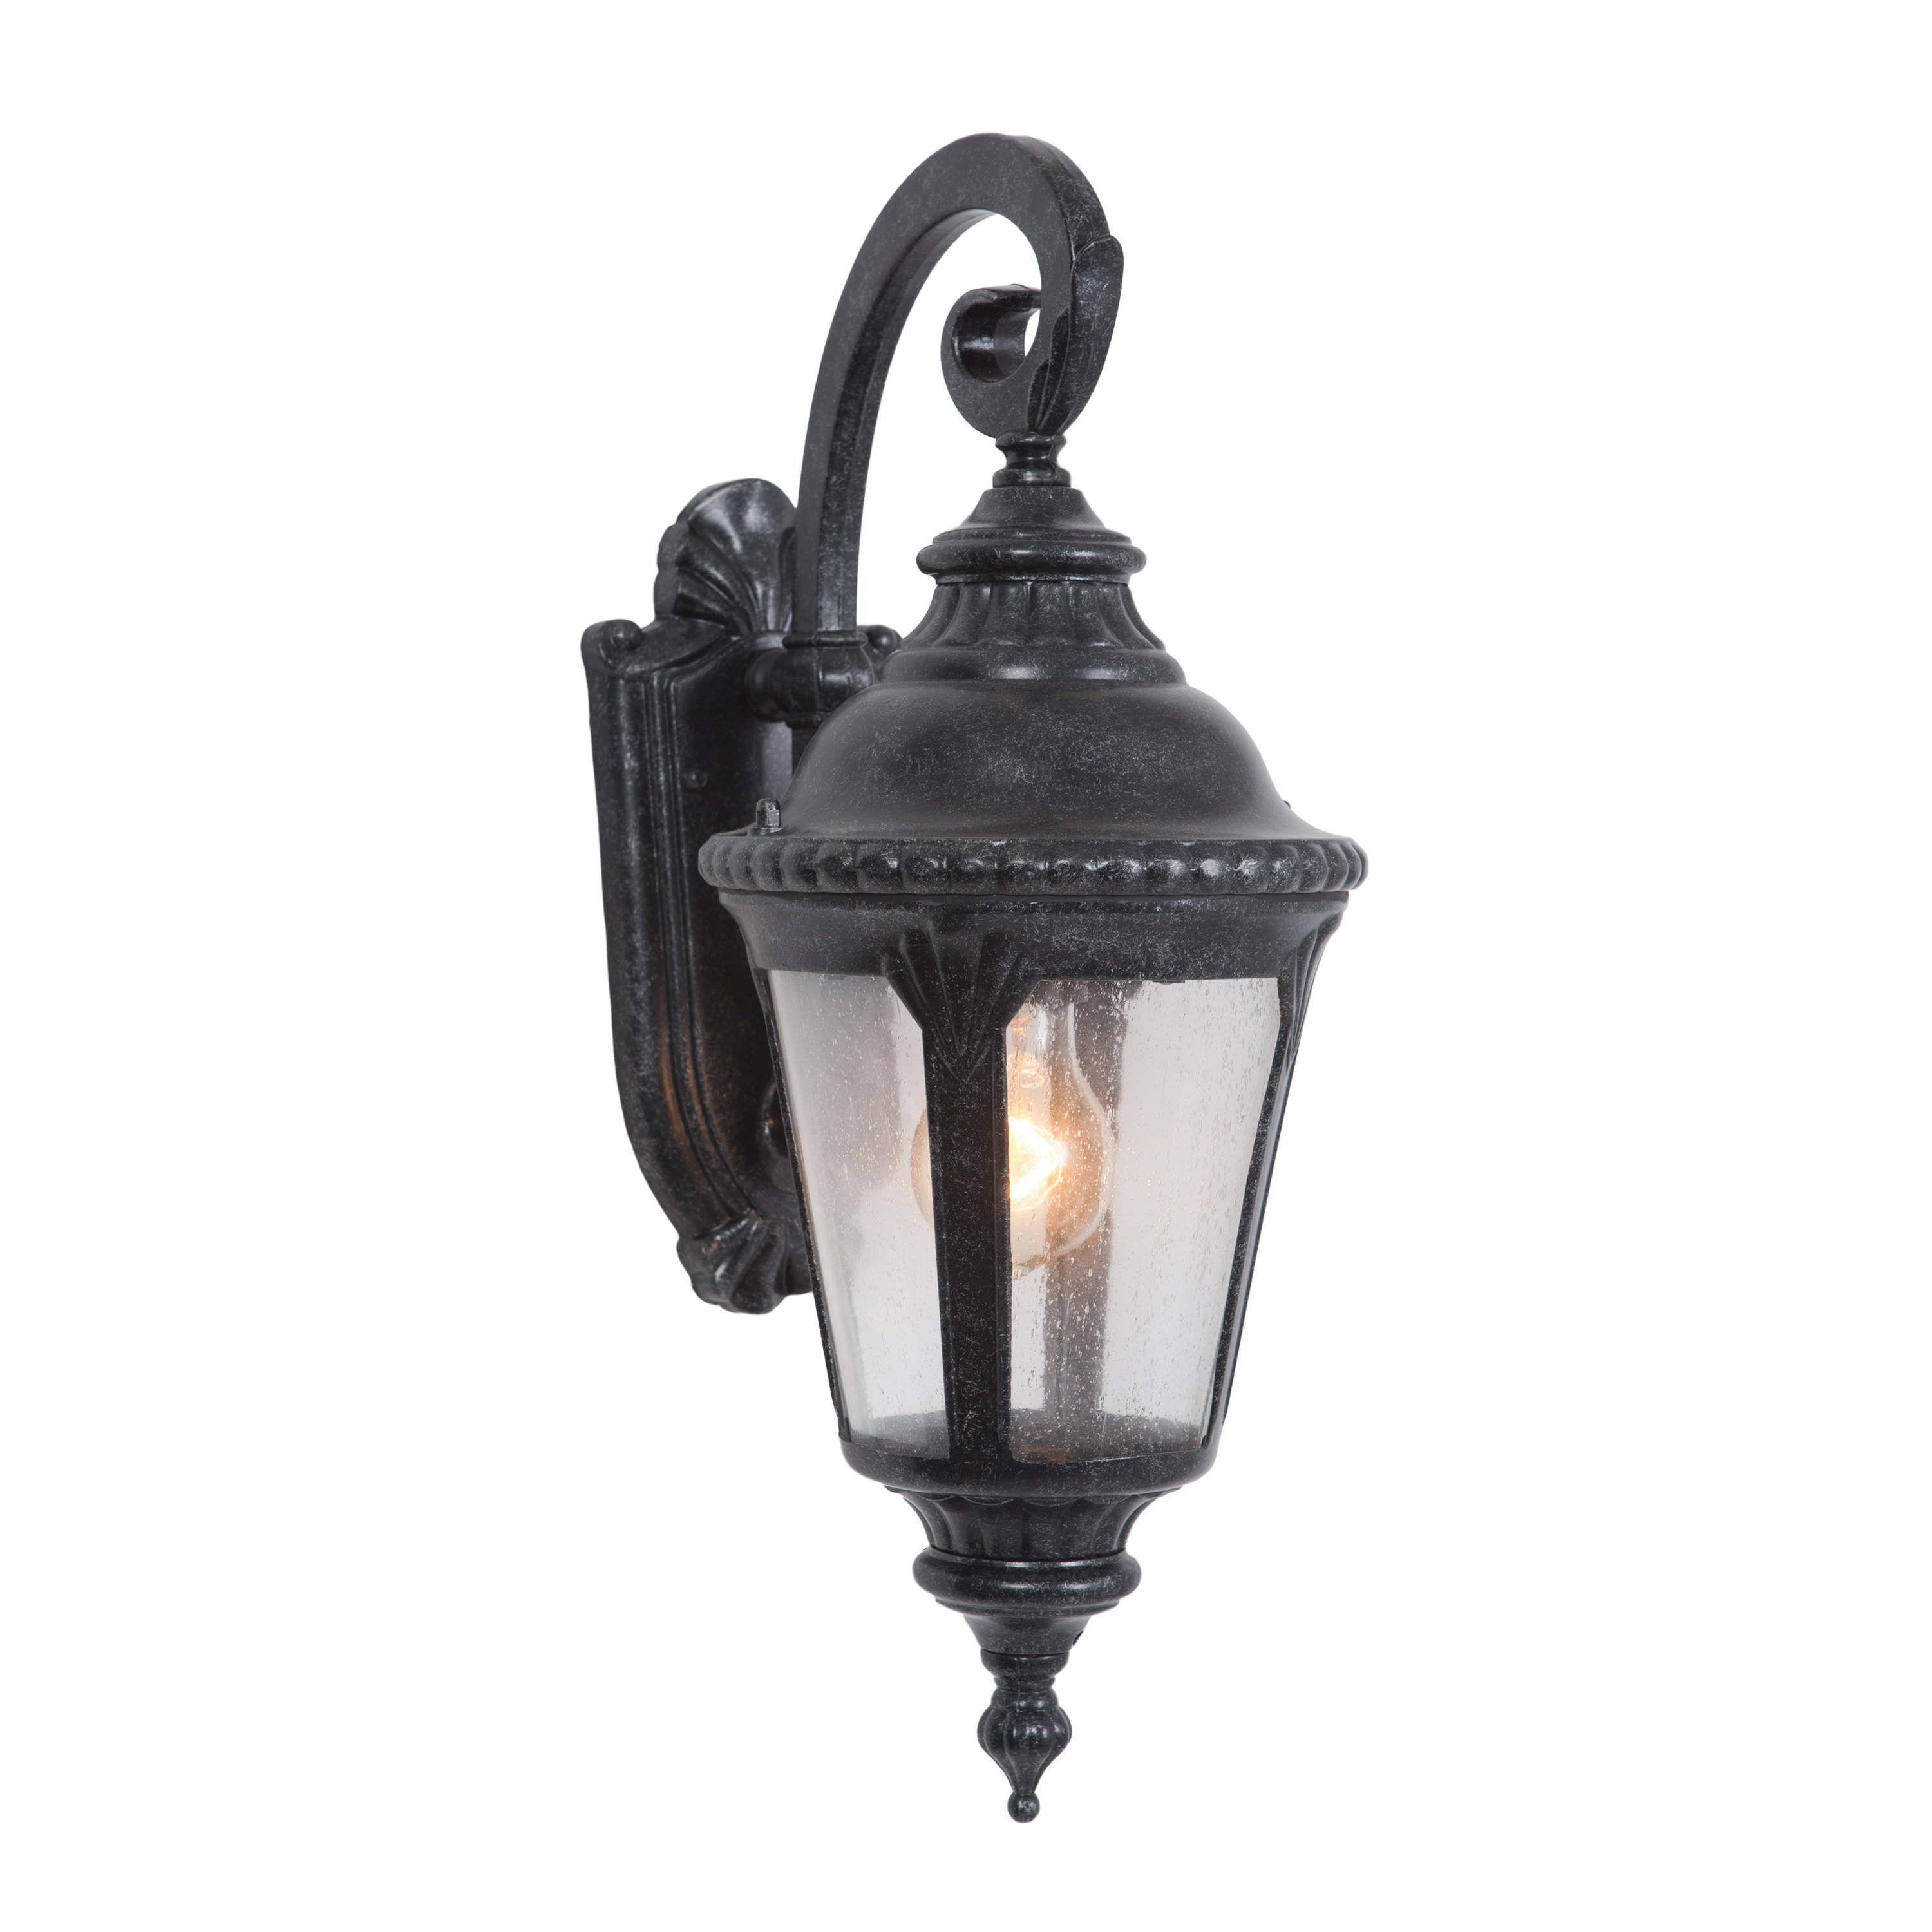 Yosemite Home Decor Columbus 7201ST-1 Outdoor Wall Sconce - image 2 of 4